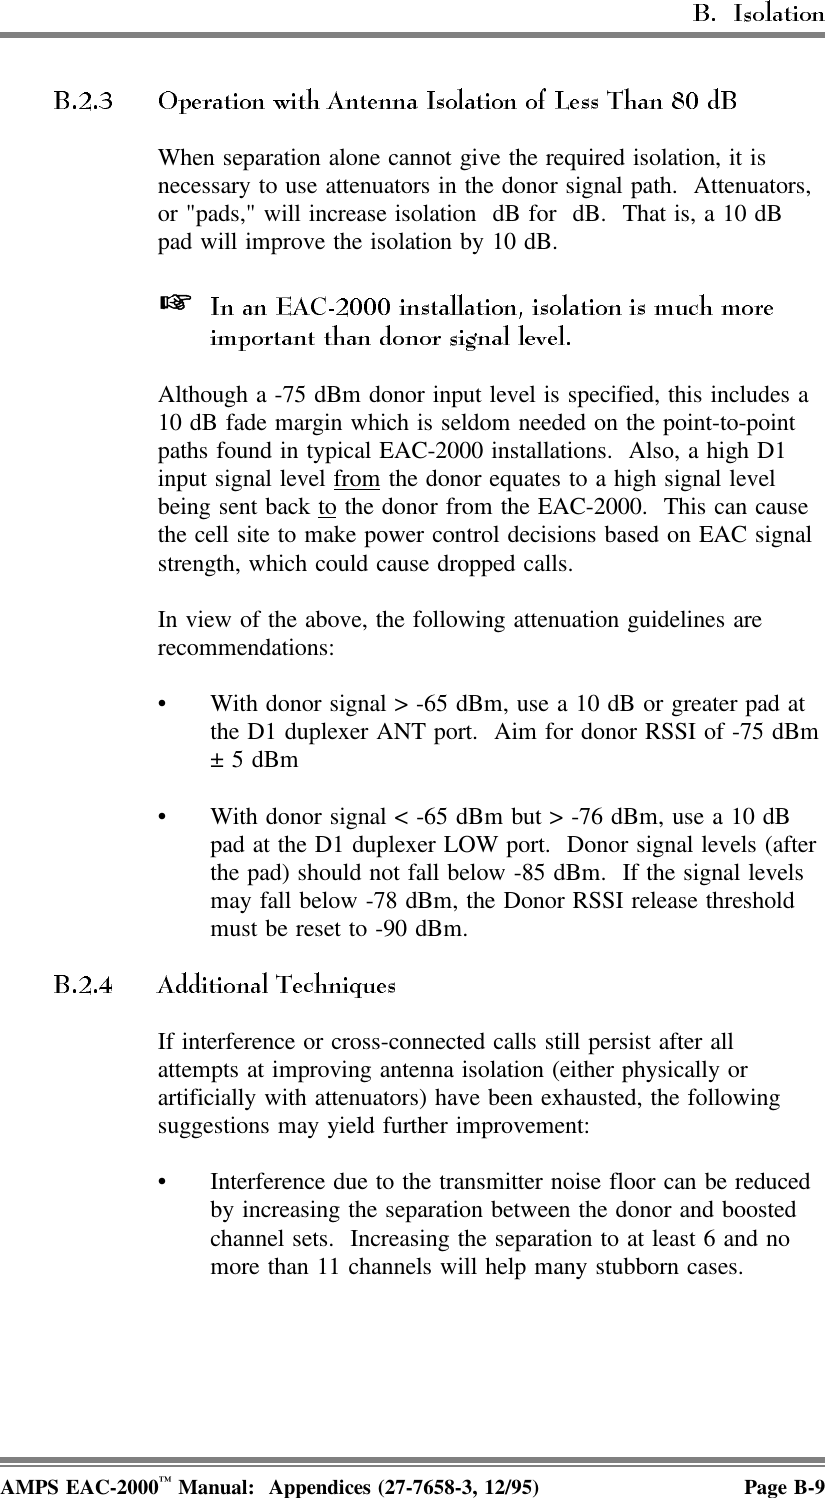 When separation alone cannot give the required isolation, it isnecessary to use attenuators in the donor signal path.  Attenuators, or &quot;pads,&quot; will increase isolation  dB for  dB.  That is, a 10 dBpad will improve the isolation by 10 dB.  Although a -75 dBm donor input level is specified, this includes a10 dB fade margin which is seldom needed on the point-to-pointpaths found in typical EAC-2000 installations.  Also, a high D1input signal level from the donor equates to a high signal levelbeing sent back to the donor from the EAC-2000.  This can causethe cell site to make power control decisions based on EAC signalstrength, which could cause dropped calls. In view of the above, the following attenuation guidelines arerecommendations: • With donor signal &gt; -65 dBm, use a 10 dB or greater pad atthe D1 duplexer ANT port.  Aim for donor RSSI of -75 dBm± 5 dBm• With donor signal &lt; -65 dBm but &gt; -76 dBm, use a 10 dBpad at the D1 duplexer LOW port.  Donor signal levels (afterthe pad) should not fall below -85 dBm.  If the signal levelsmay fall below -78 dBm, the Donor RSSI release thresholdmust be reset to -90 dBm.If interference or cross-connected calls still persist after allattempts at improving antenna isolation (either physically orartificially with attenuators) have been exhausted, the followingsuggestions may yield further improvement:• Interference due to the transmitter noise floor can be reducedby increasing the separation between the donor and boostedchannel sets.  Increasing the separation to at least 6 and nomore than 11 channels will help many stubborn cases.AMPS EAC-2000™ Manual:  Appendices (27-7658-3, 12/95) Page B-9